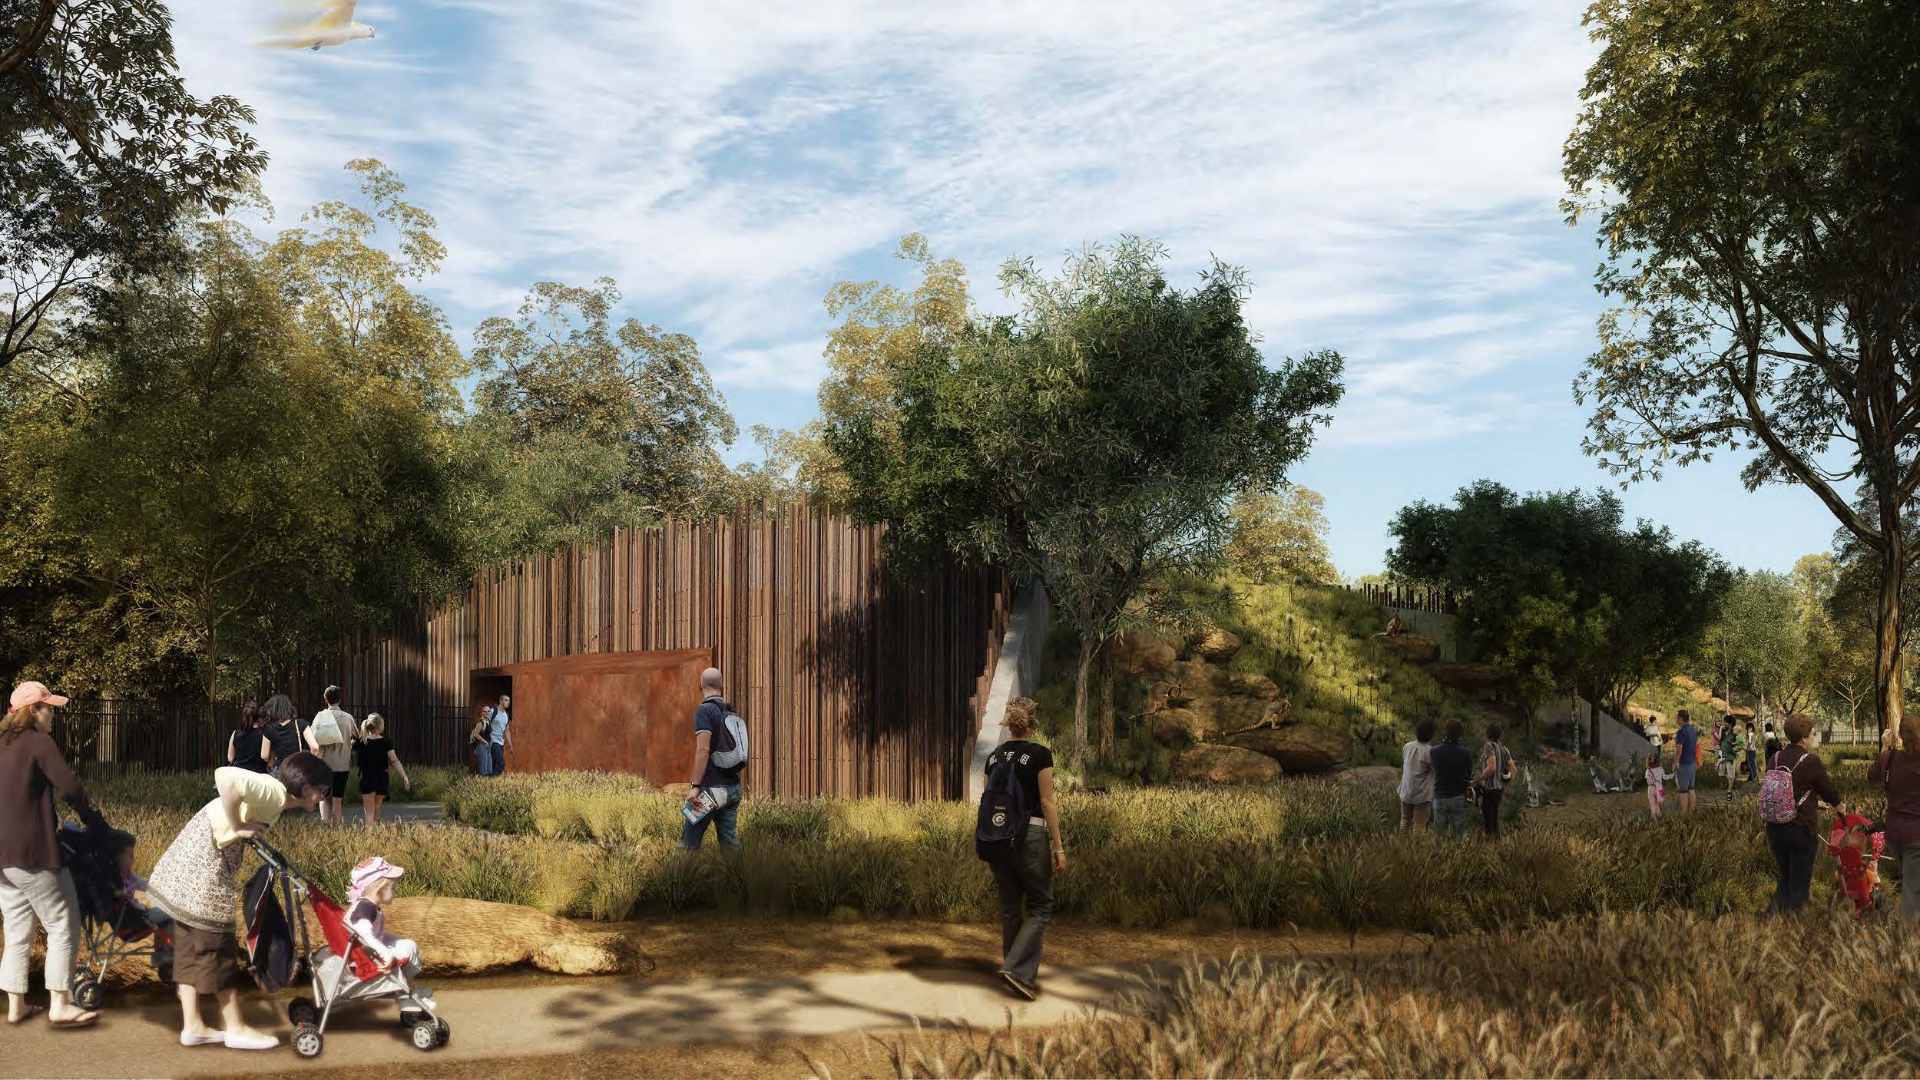 The New Sydney Zoo Will Be Home to Australia's Largest Reptile and Nocturnal Animal House